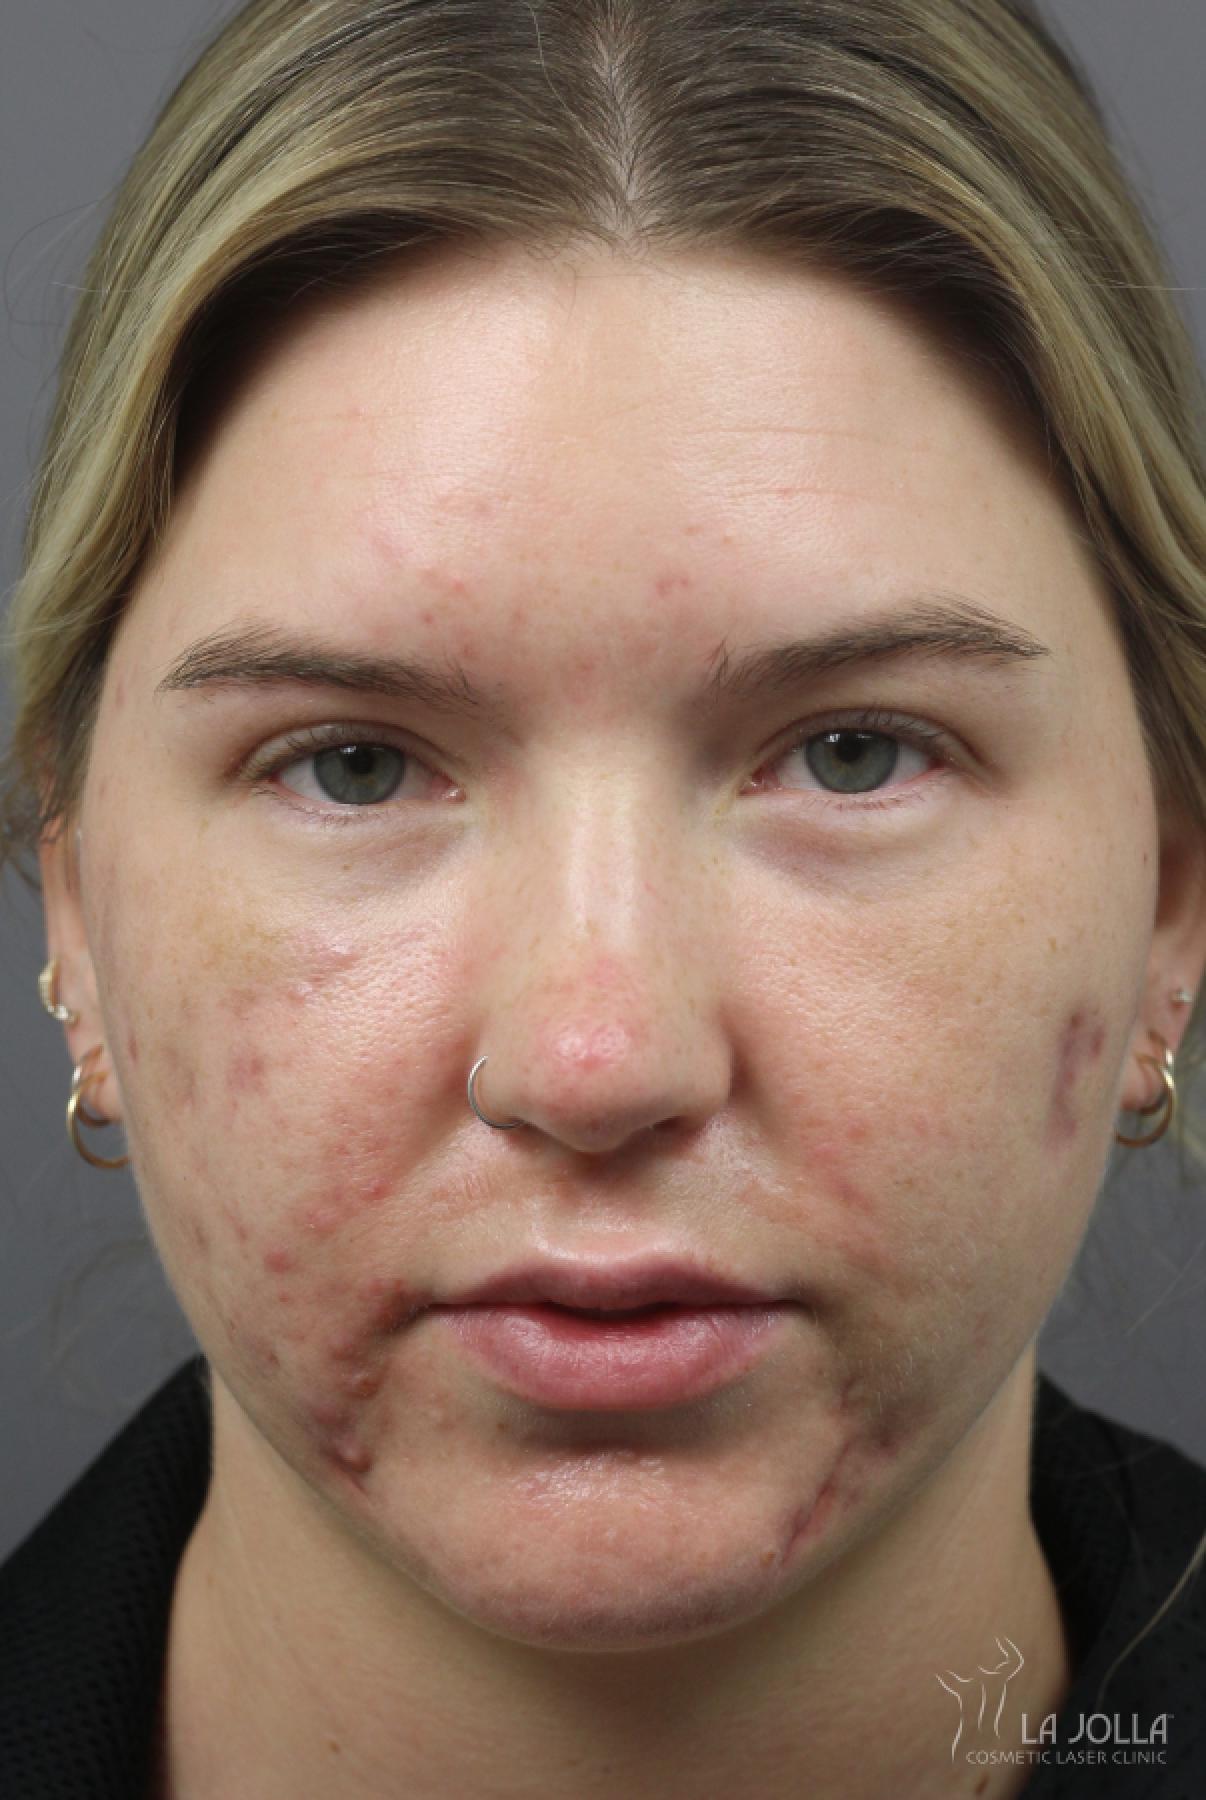 Acne Scars: Patient 2 - Before 2